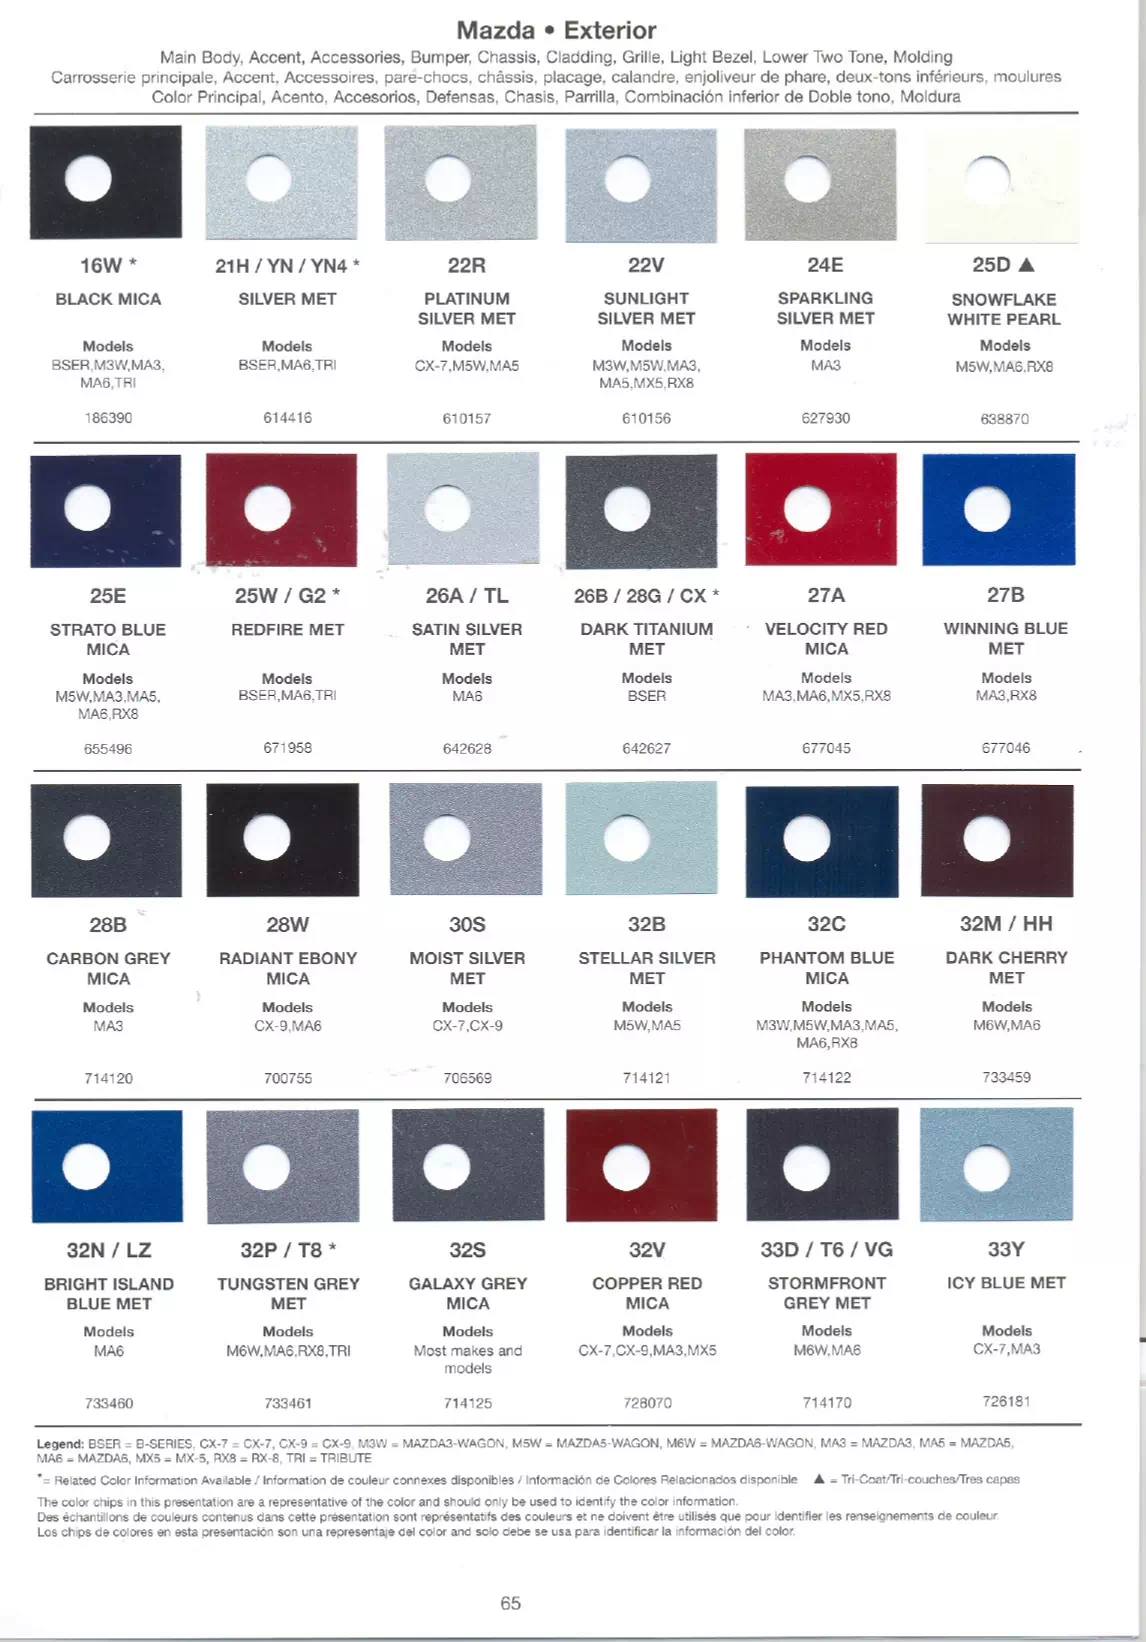 oem paint codes, color names, and paint swatches for 2007 Mazda automobiles.